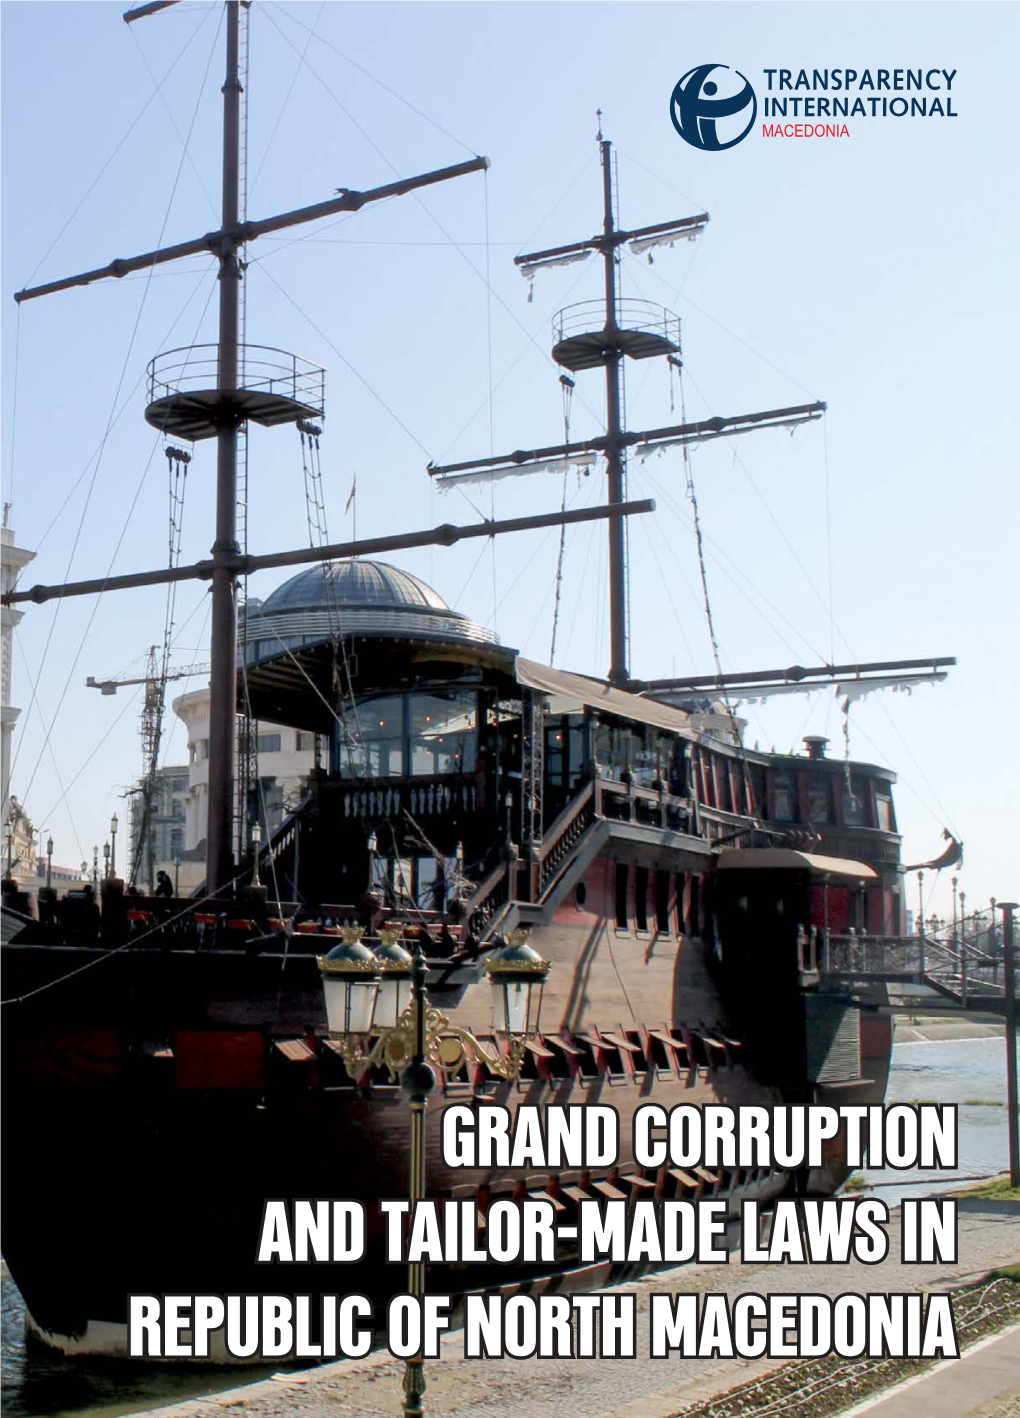 Grand Corruption and Tailor-Made Laws in Republic of North Macedonia